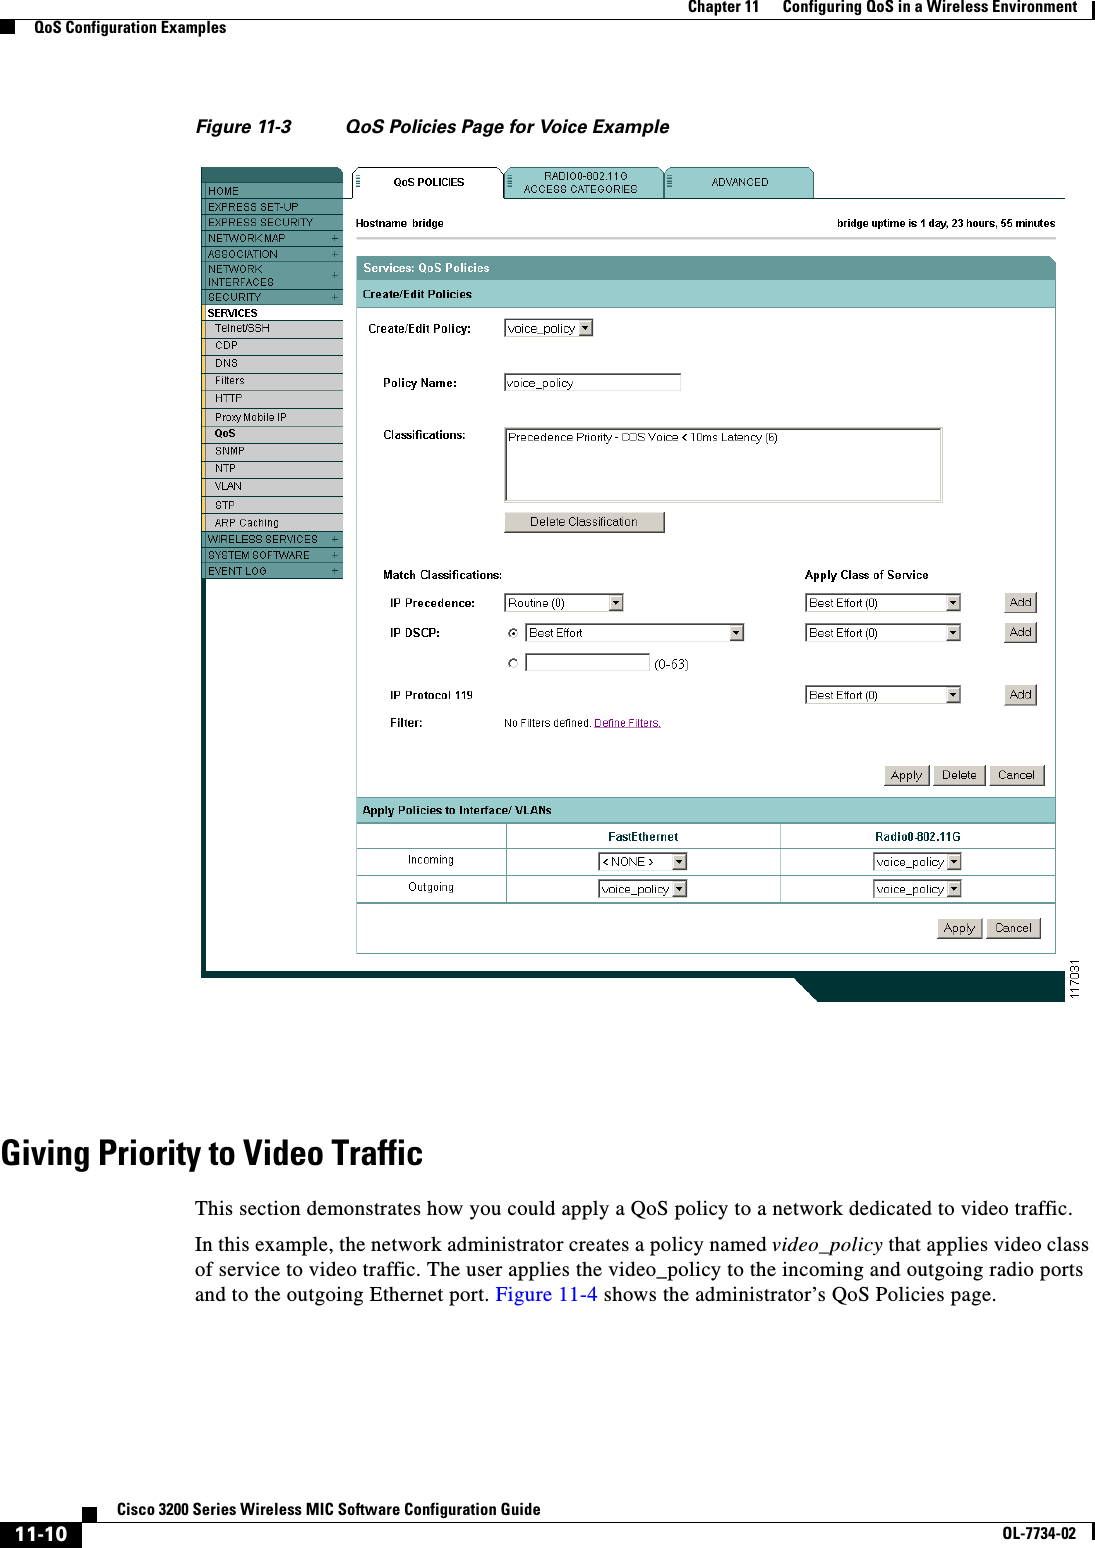 11-10Cisco 3200 Series Wireless MIC Software Configuration GuideOL-7734-02Chapter 11      Configuring QoS in a Wireless EnvironmentQoS Configuration ExamplesFigure 11-3 QoS Policies Page for Voice ExampleGiving Priority to Video TrafficThis section demonstrates how you could apply a QoS policy to a network dedicated to video traffic.In this example, the network administrator creates a policy named video_policy that applies video class of service to video traffic. The user applies the video_policy to the incoming and outgoing radio ports and to the outgoing Ethernet port. Figure 11-4 shows the administrator’s QoS Policies page. 